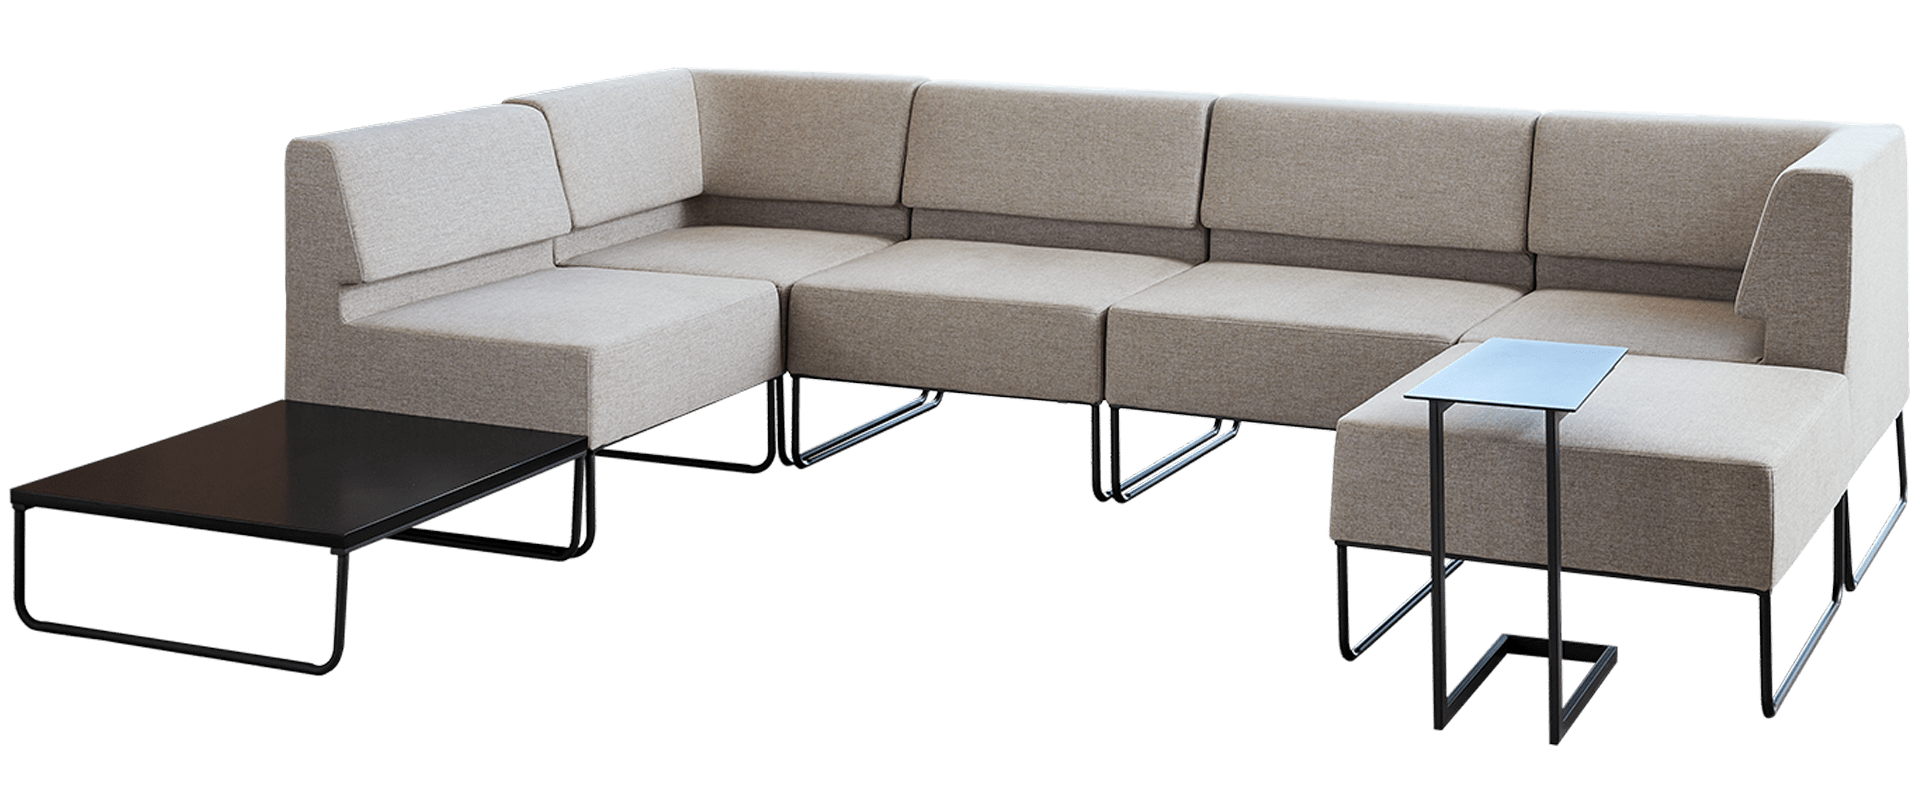 sectional sofa with various tables